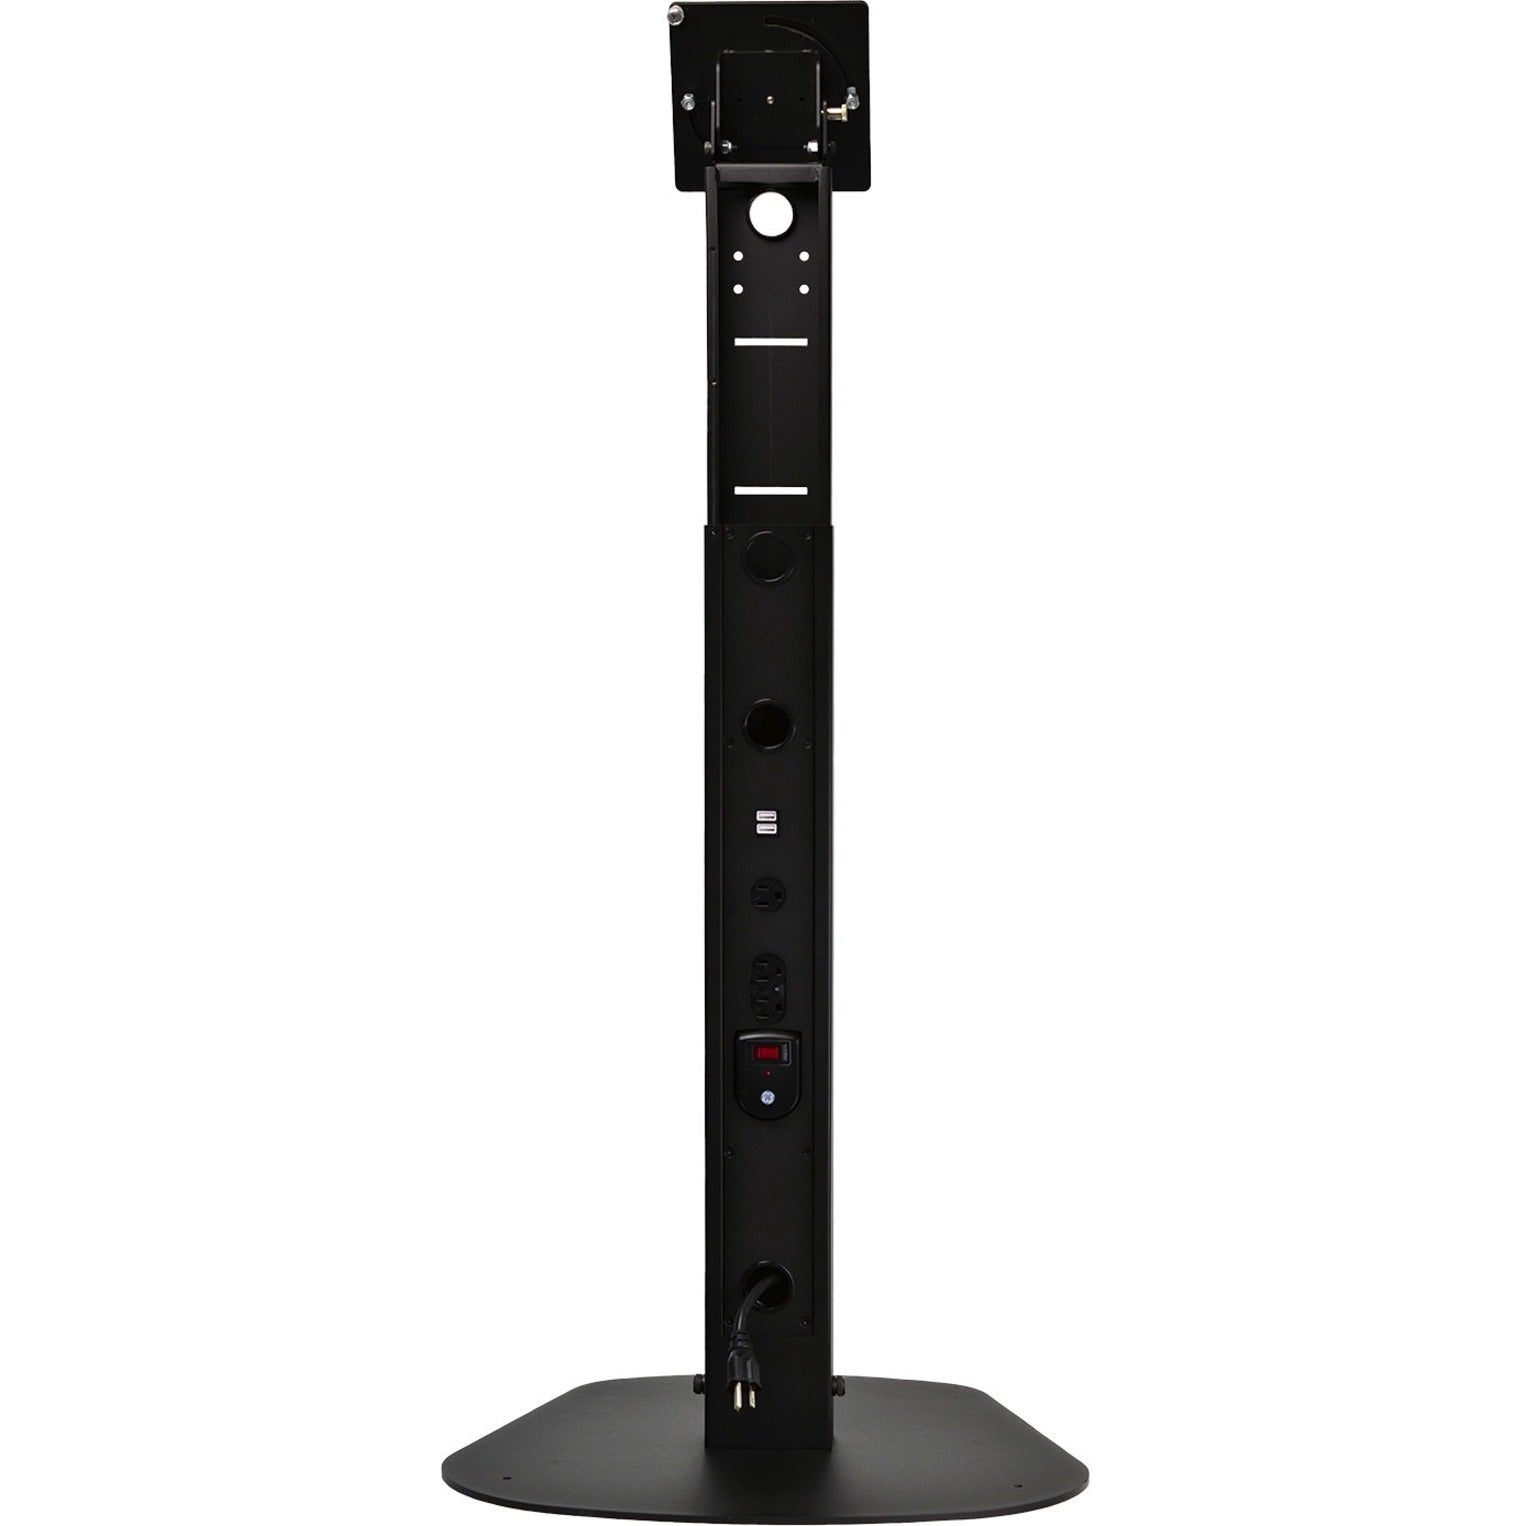 ViewSonic STND-042 Commercial-Grade Kiosk Stand, Adjustable Height, Pivot, Heavy Duty, Cable Management